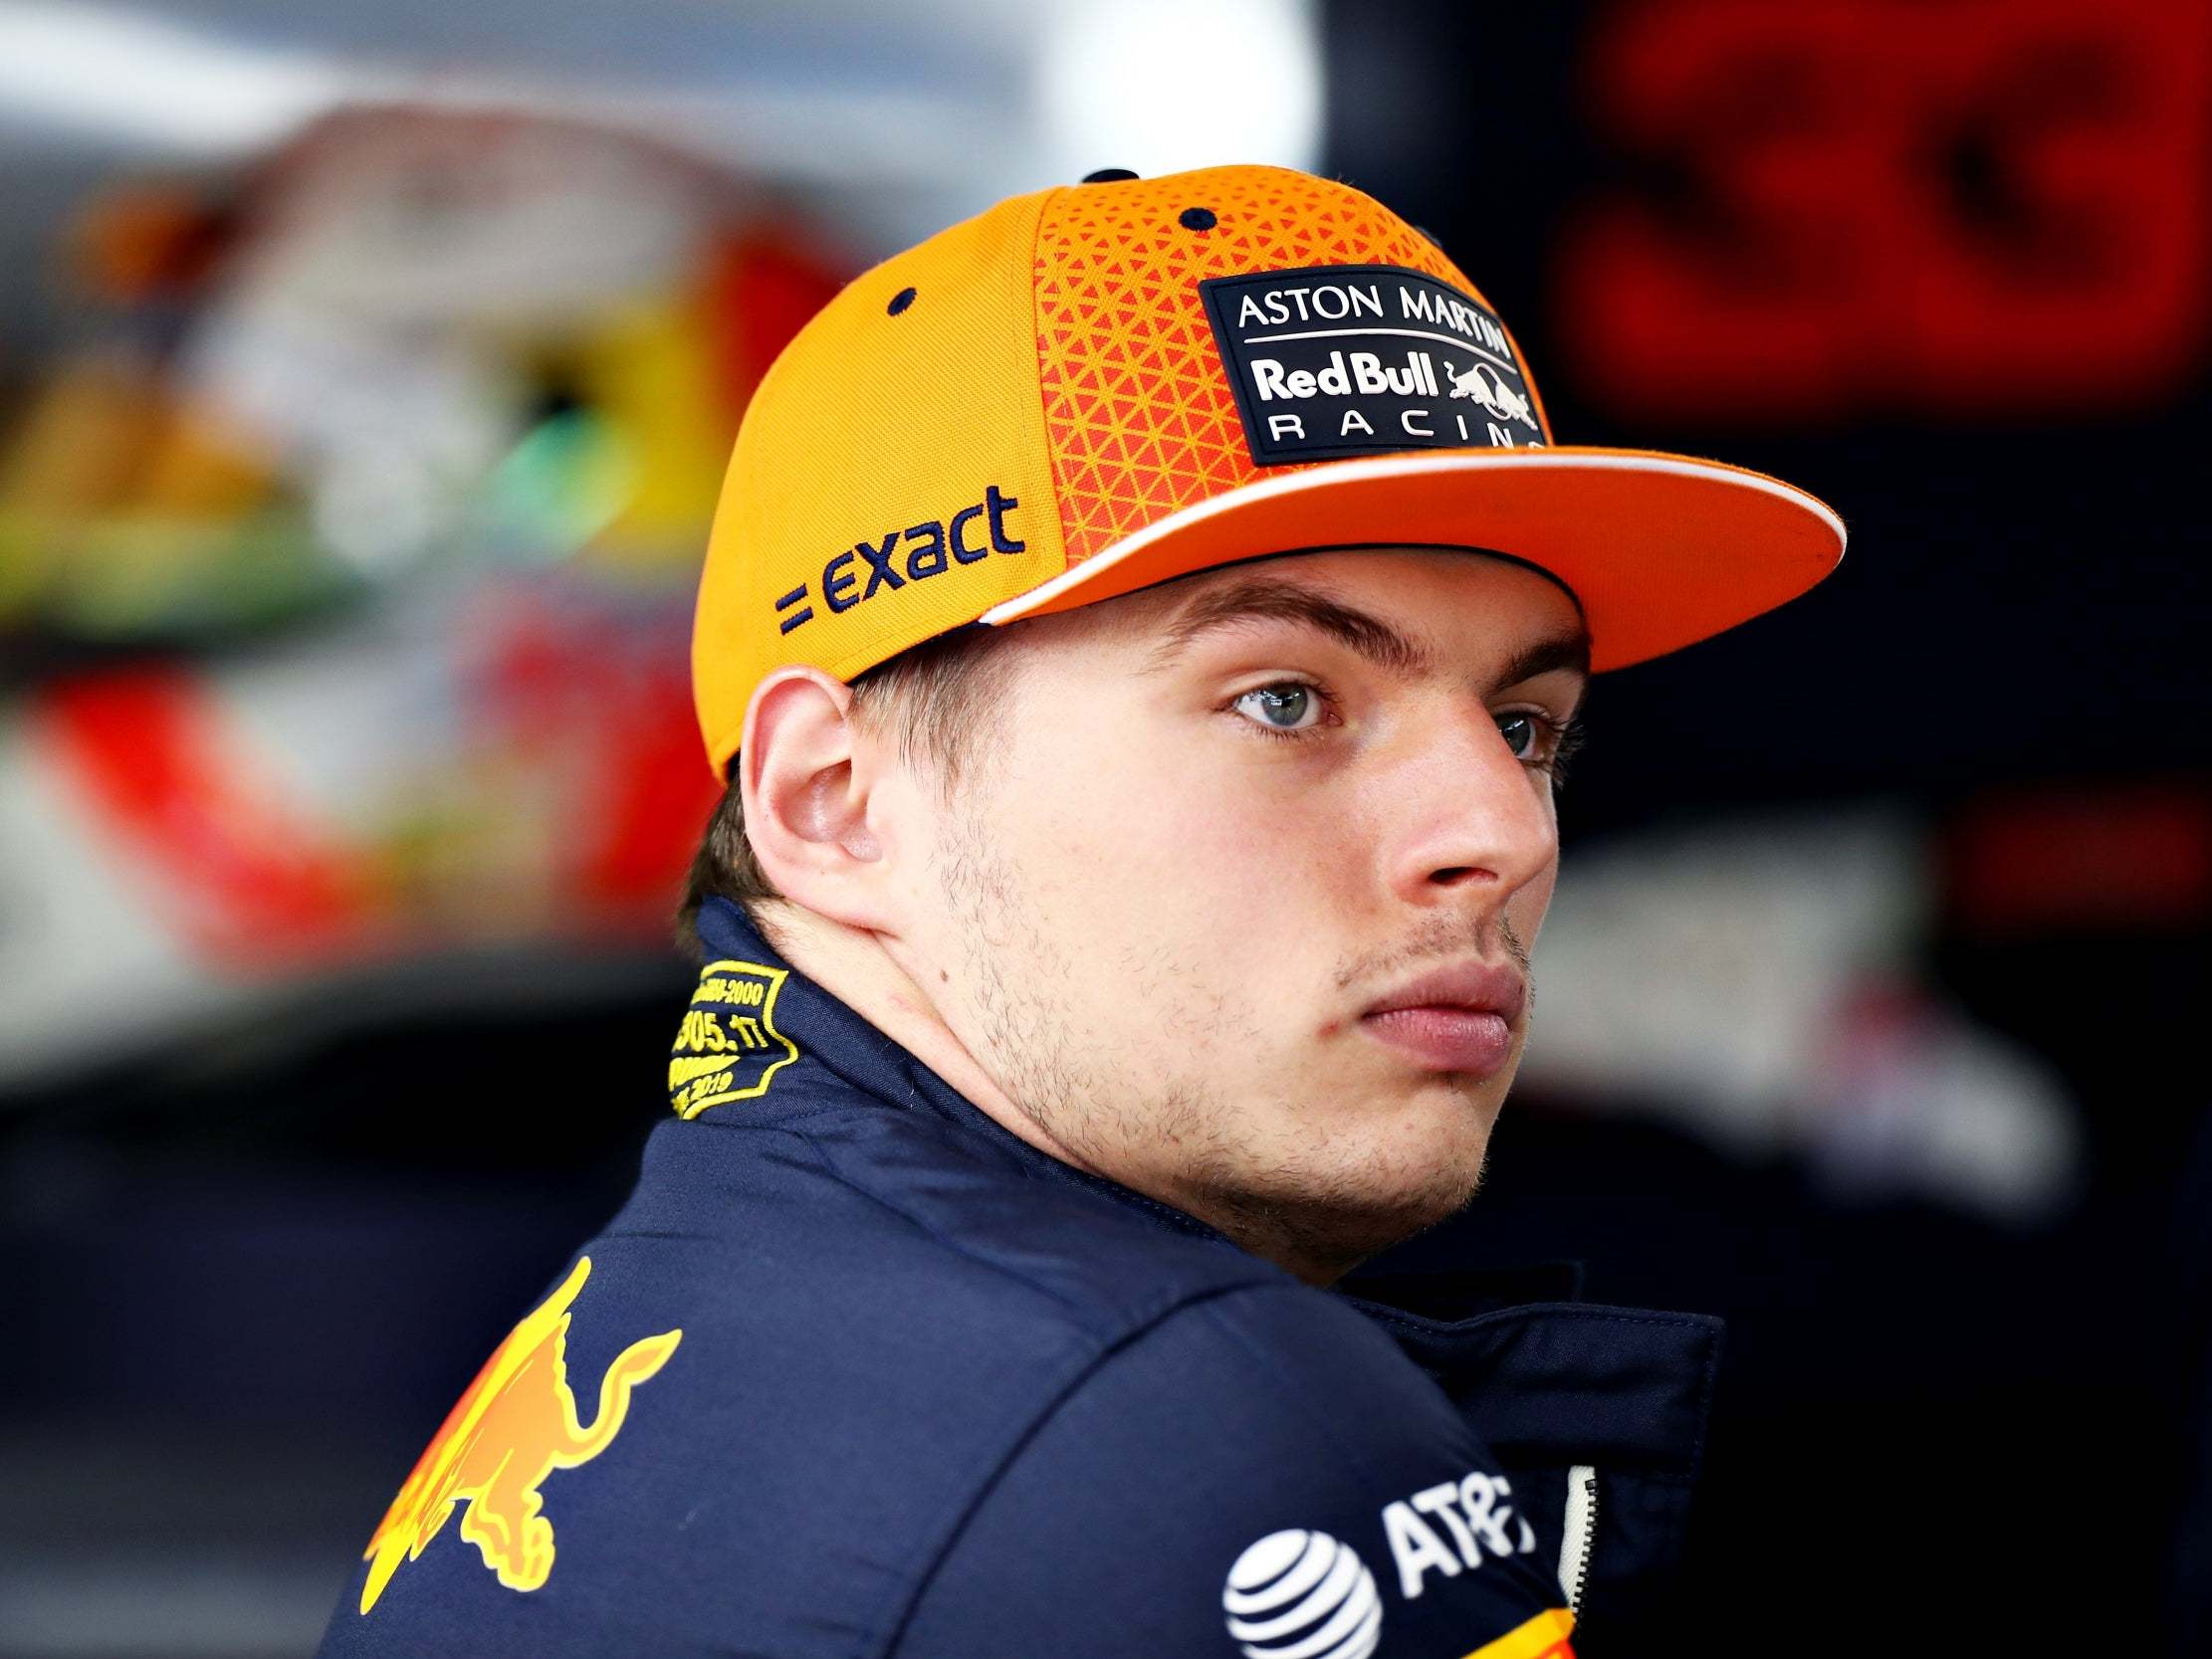 Max Verstappen has hit back at Lewis Hamilton's criticism of his driving